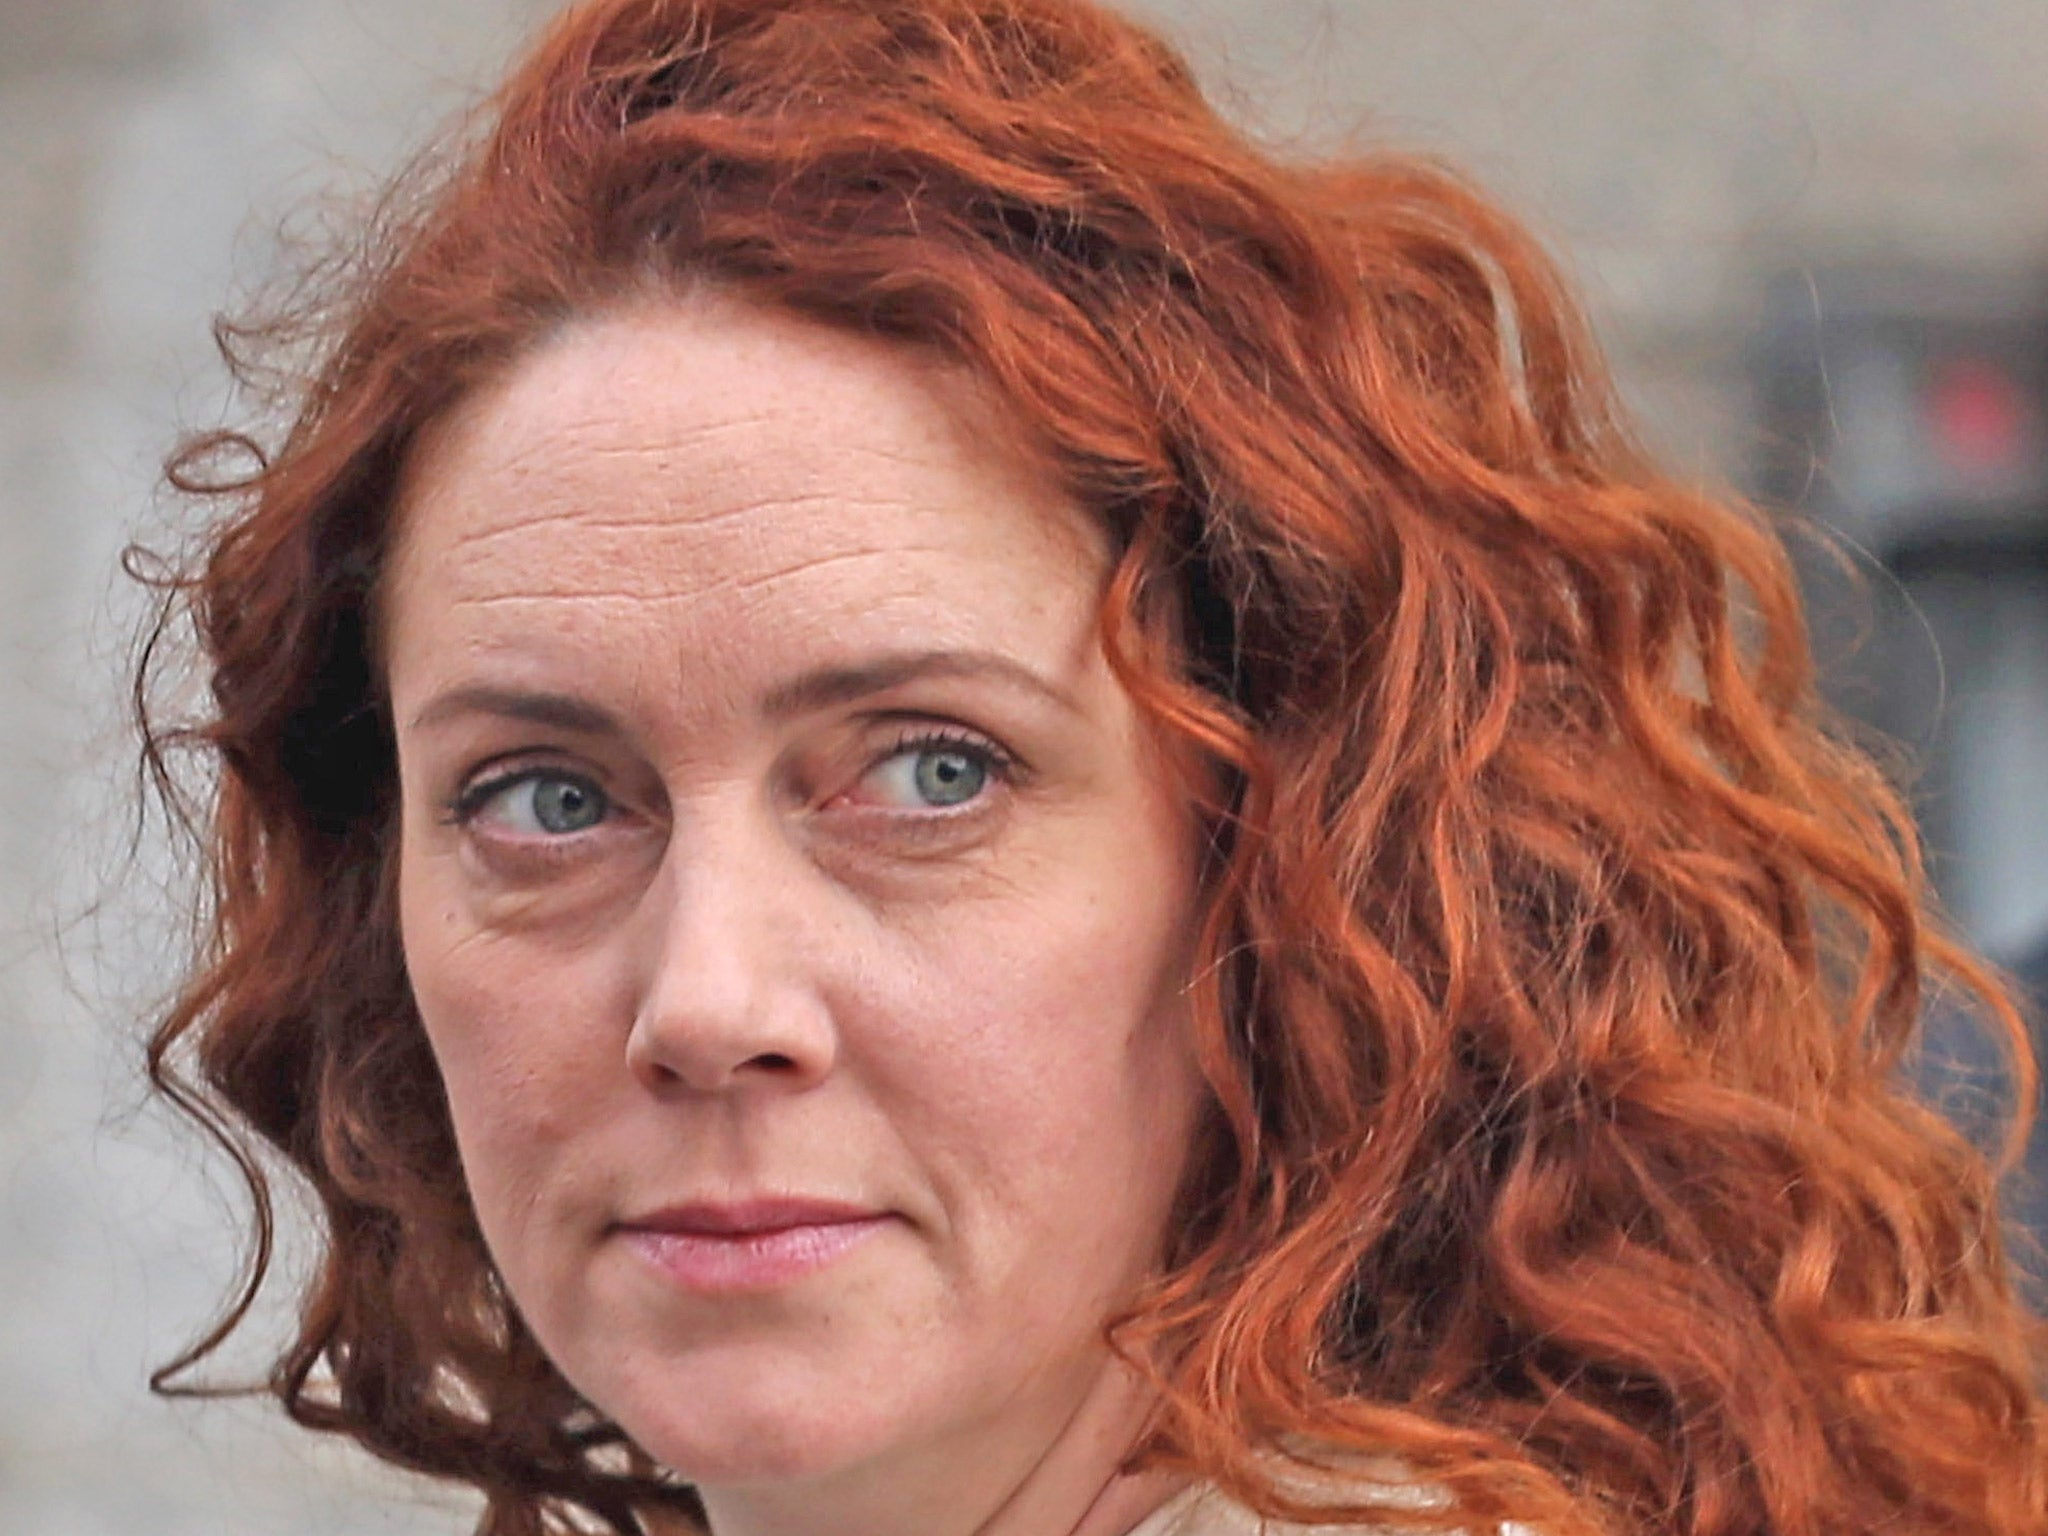 Rebekah Brooks, former editor of The Sun and the News of the World